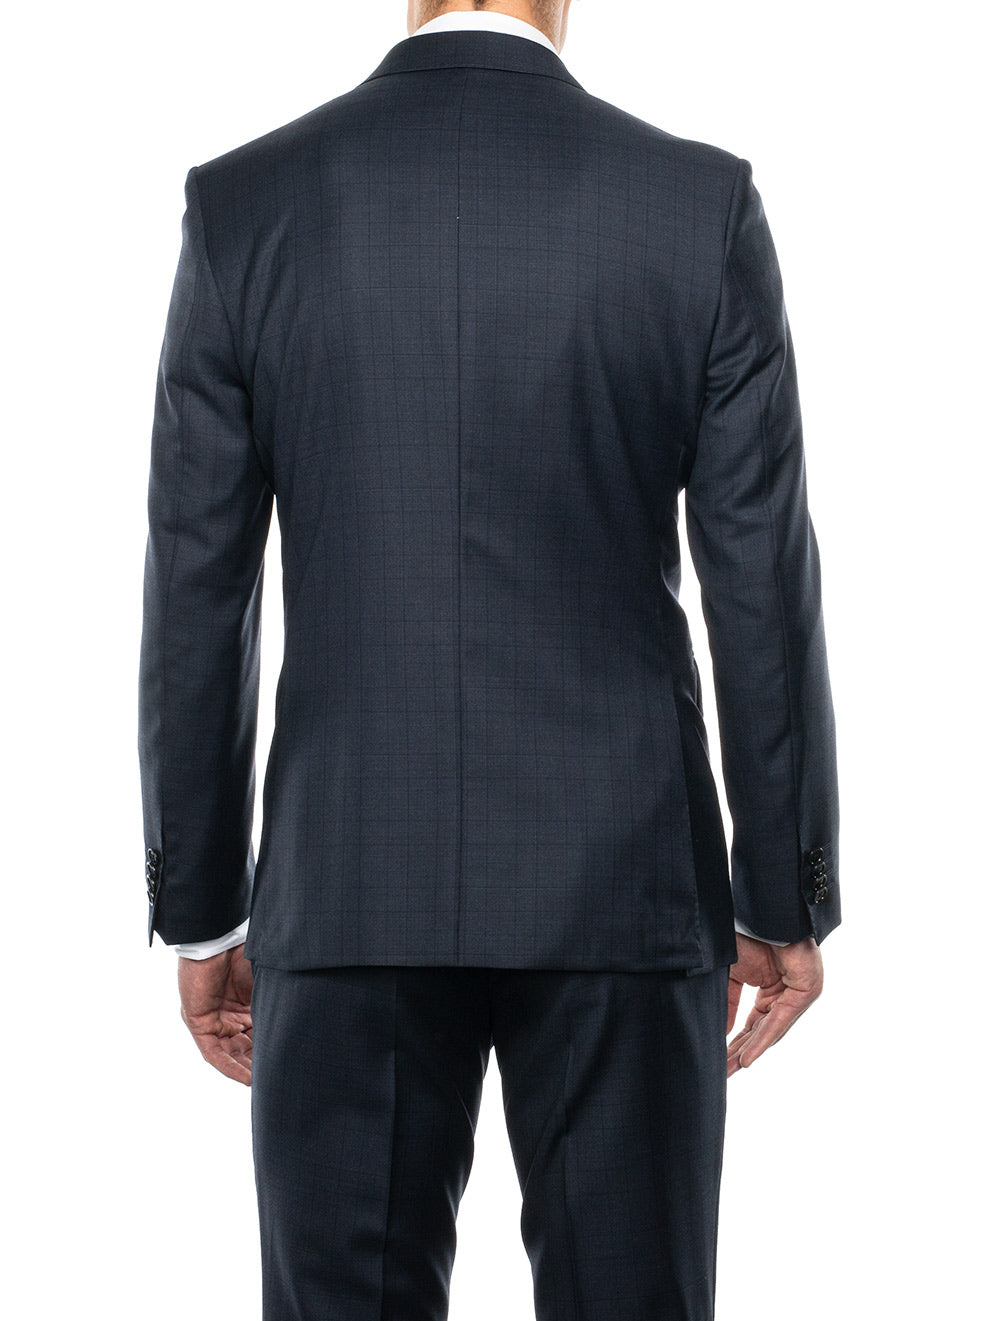 Heritage Collection Check Suit Navy